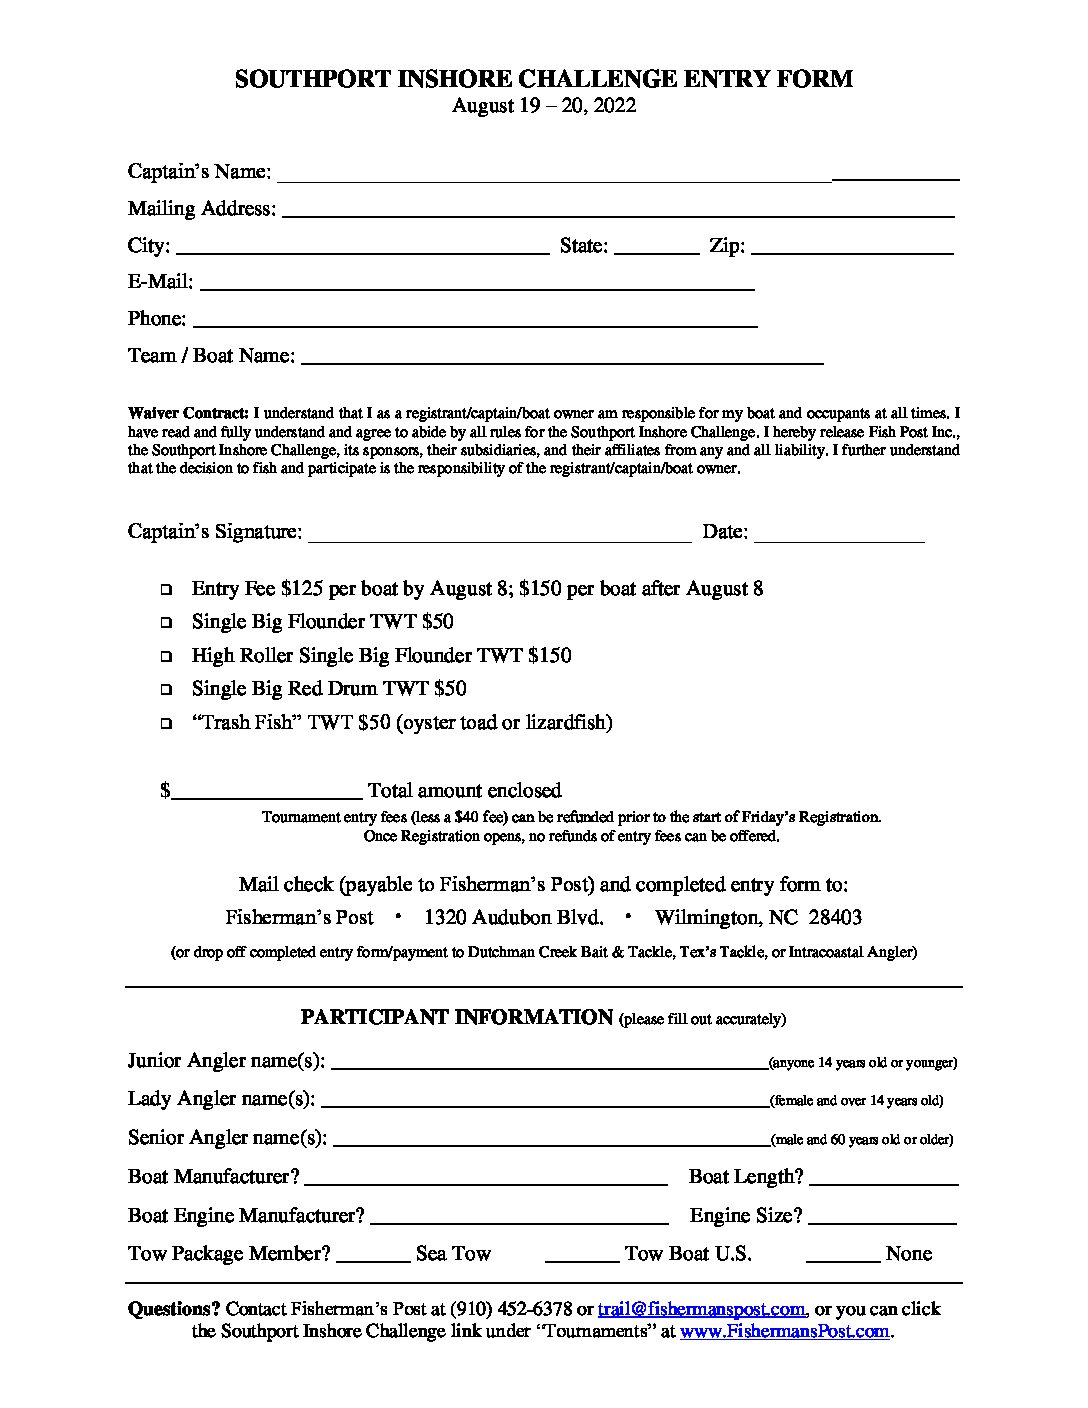 2022 Southport Inshore Challenge Print Entry Form